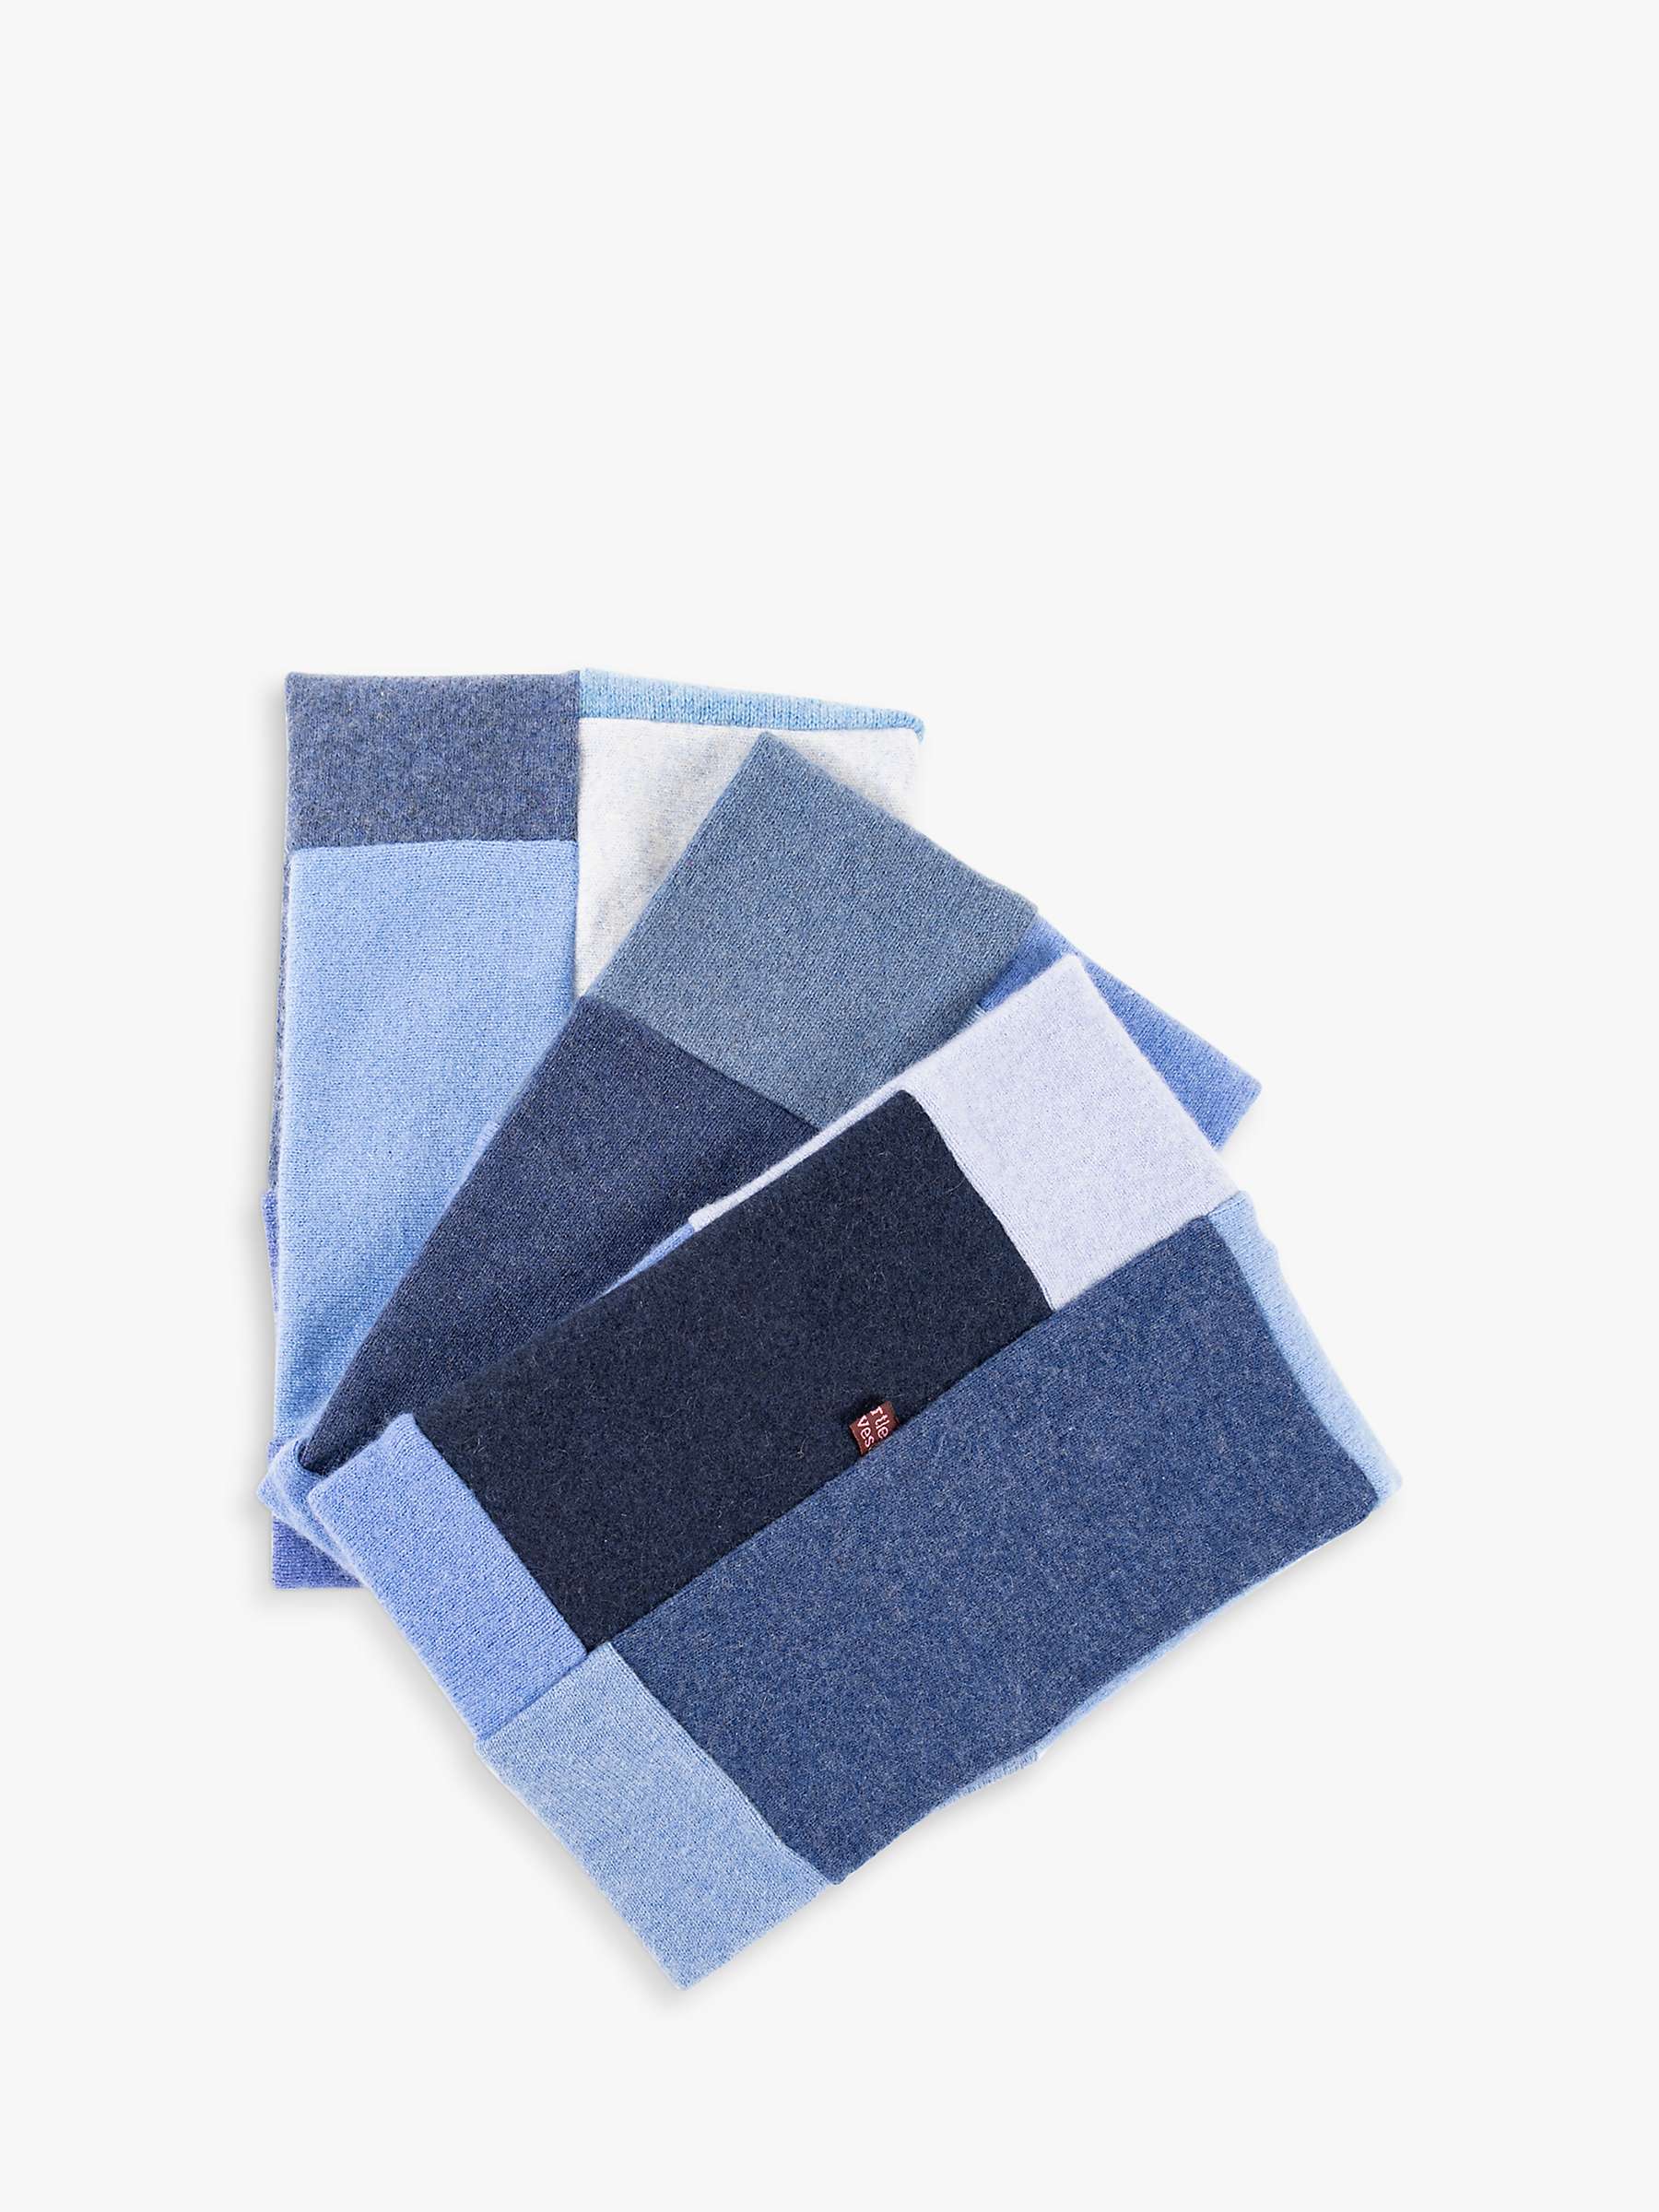 Buy Celtic & Co. x Turtle Doves Recycled Cashmere Neckwarmer Online at johnlewis.com